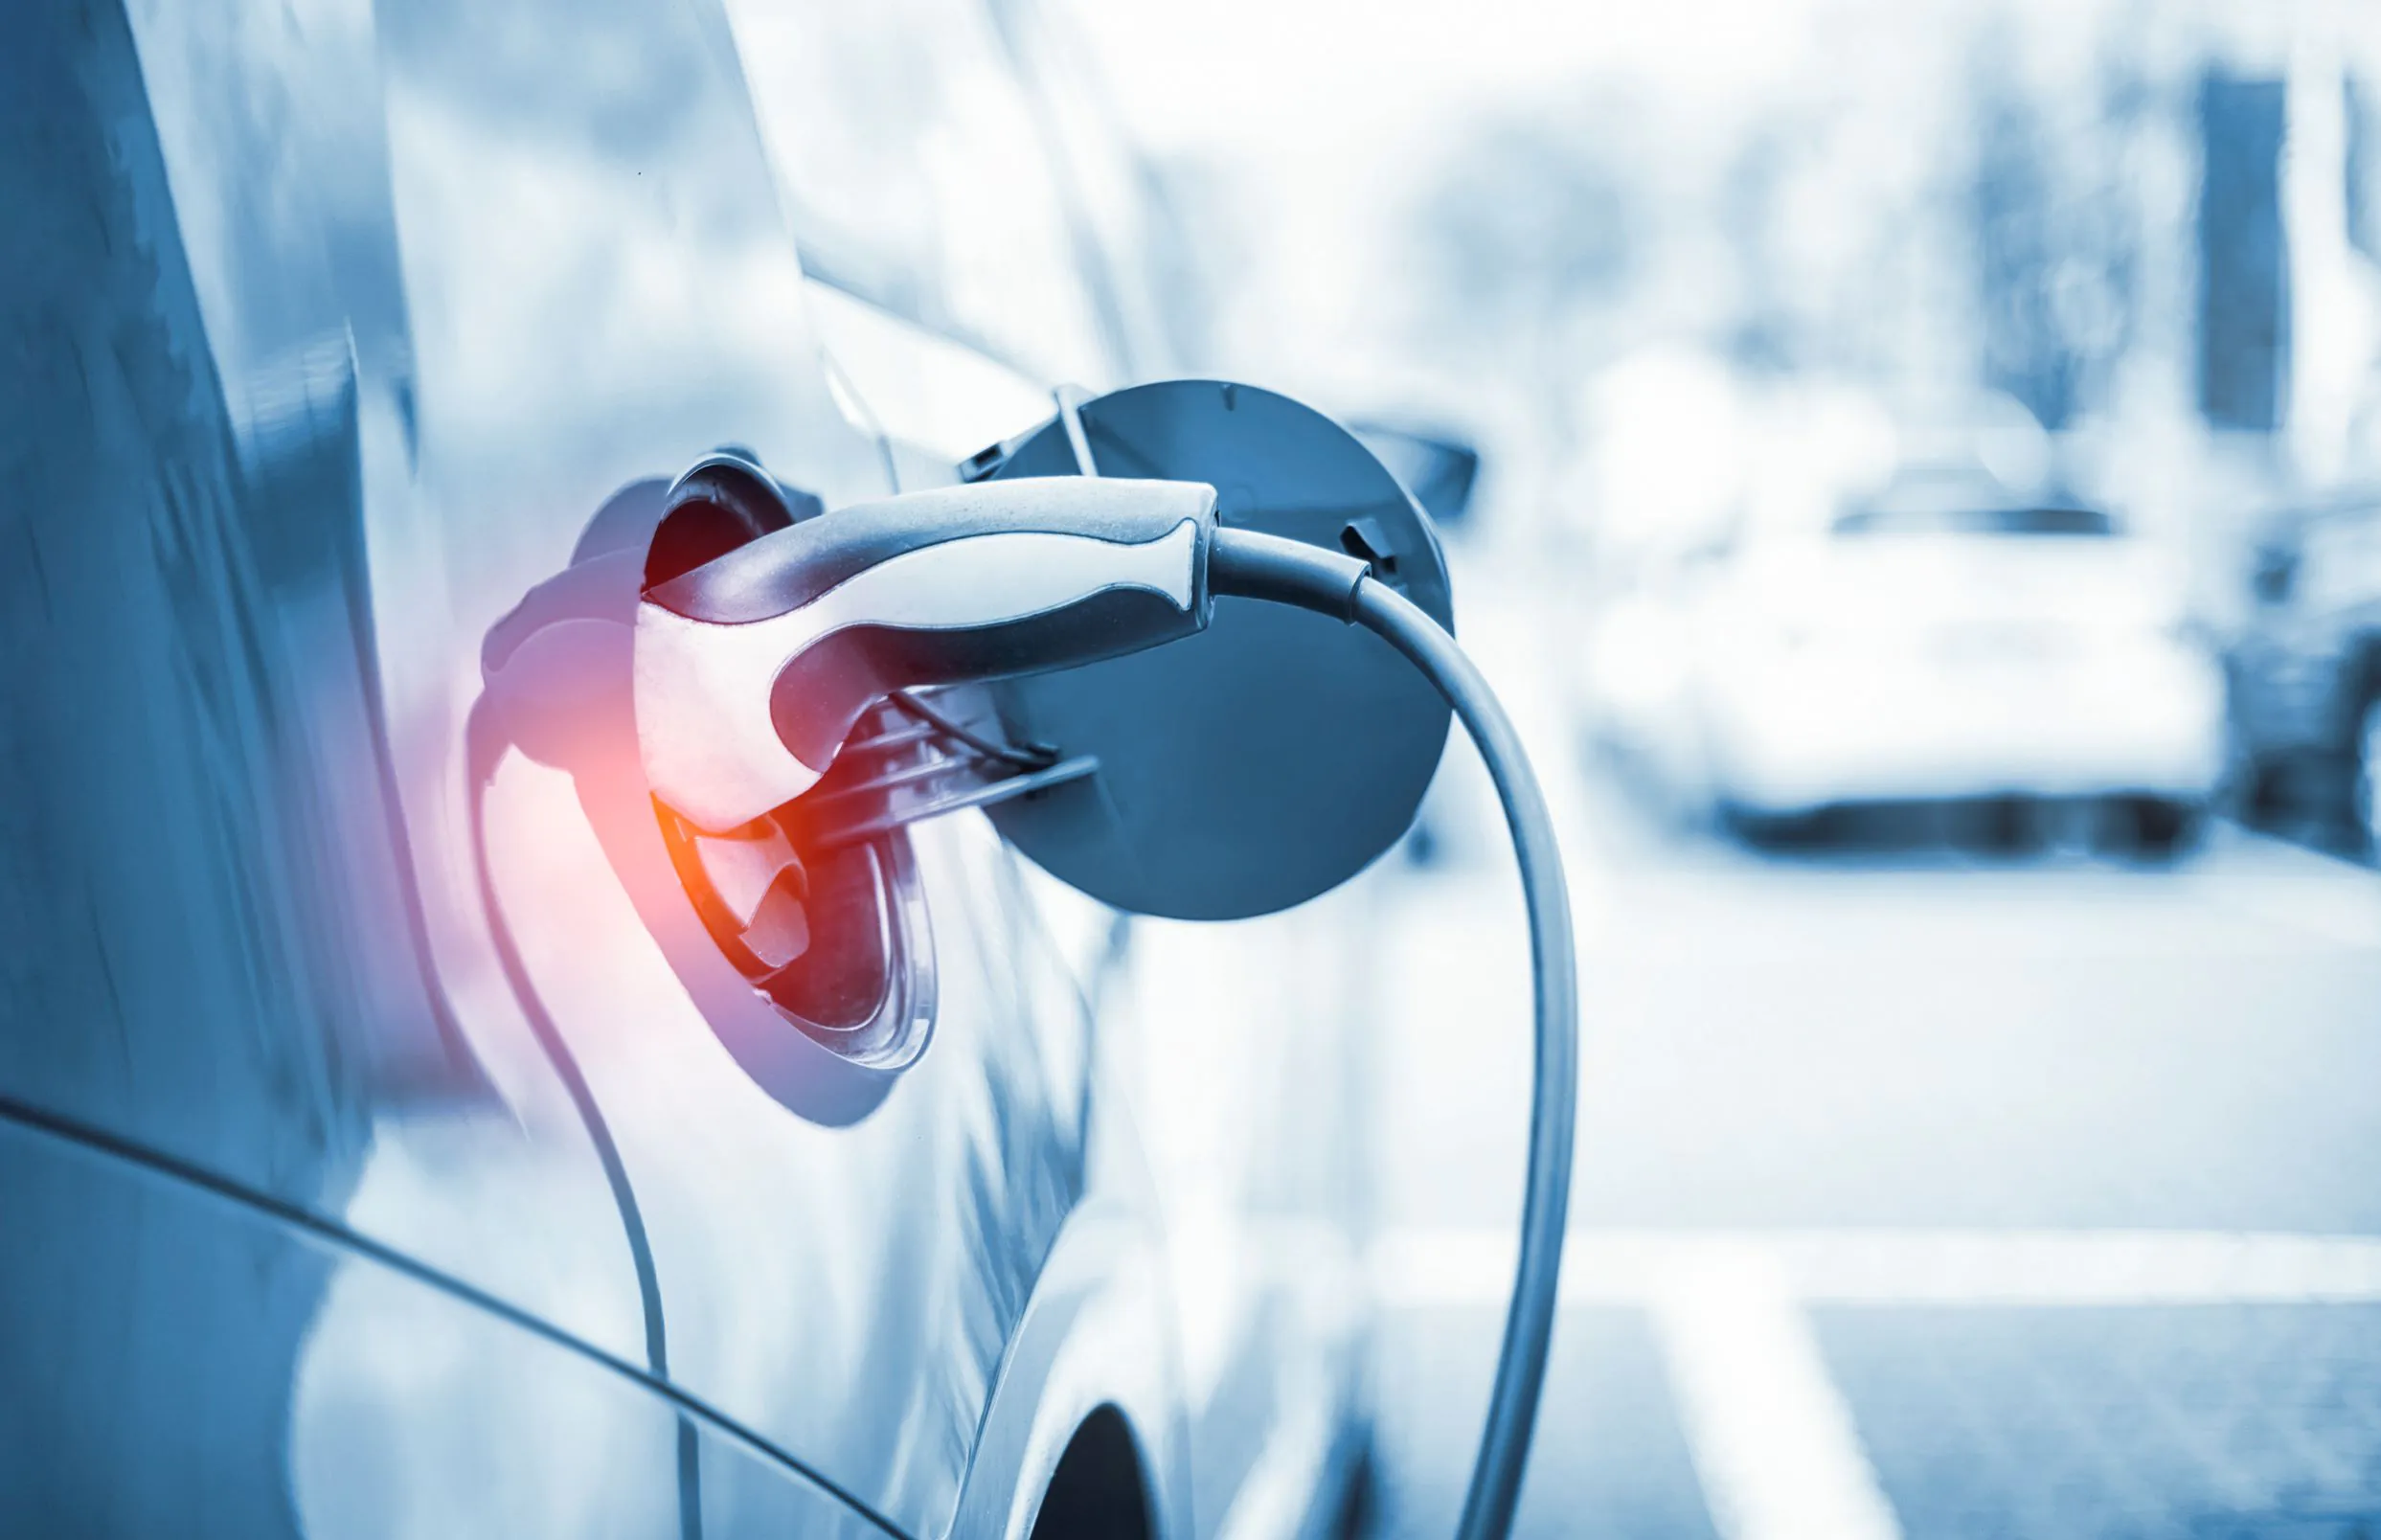 Electric vehicle market outlook in Asia 2020